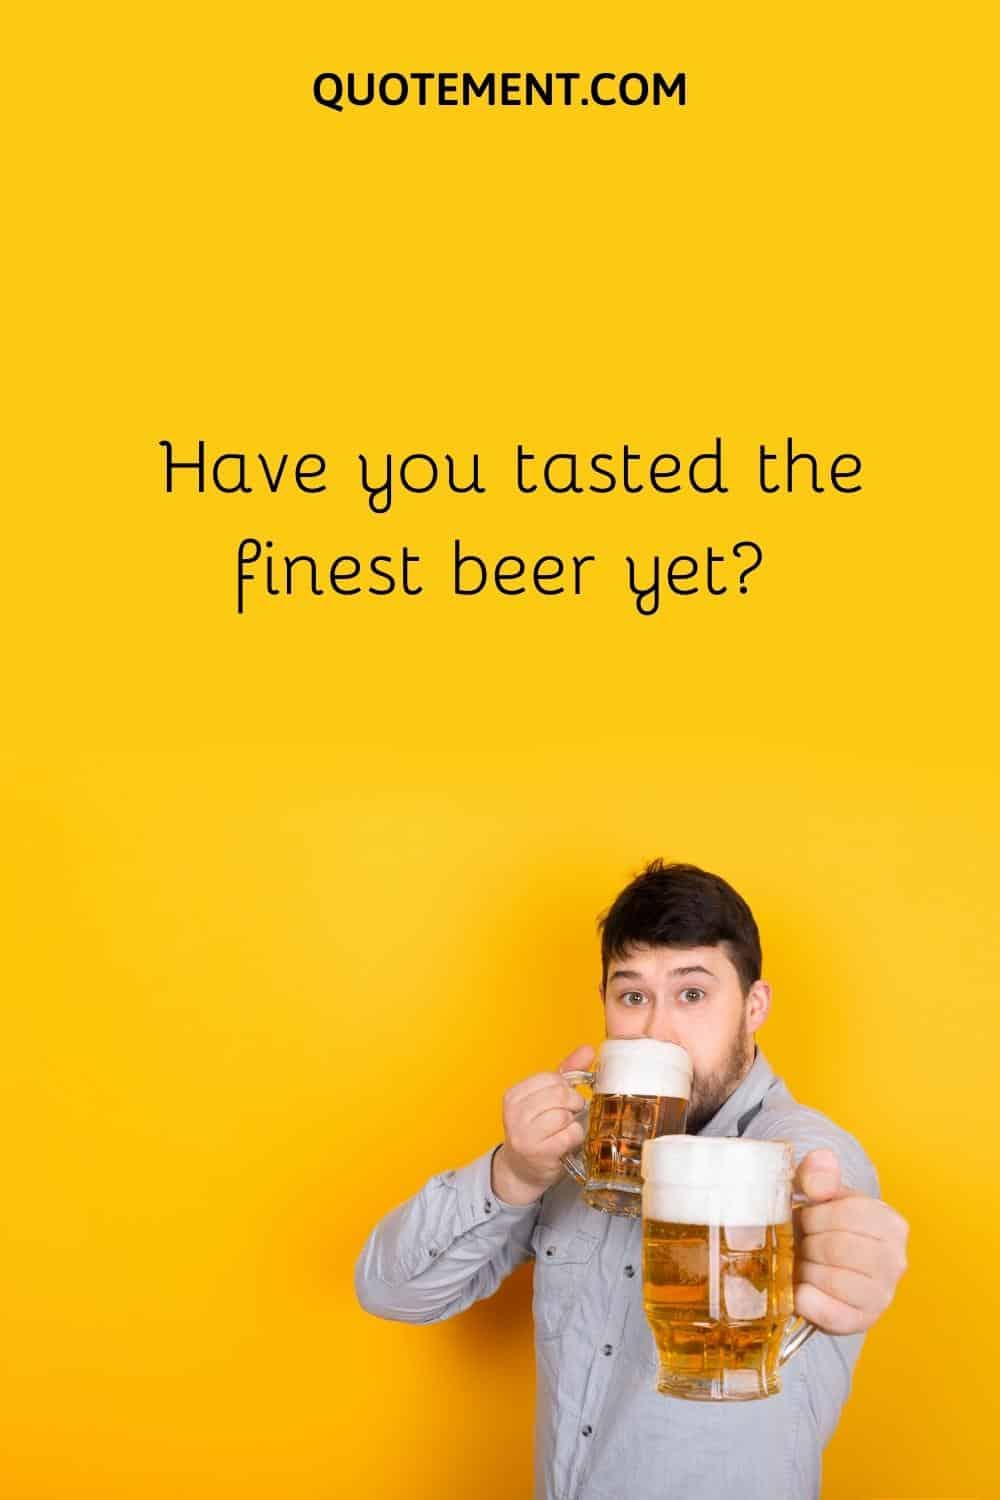 Have you tasted the finest beer yet